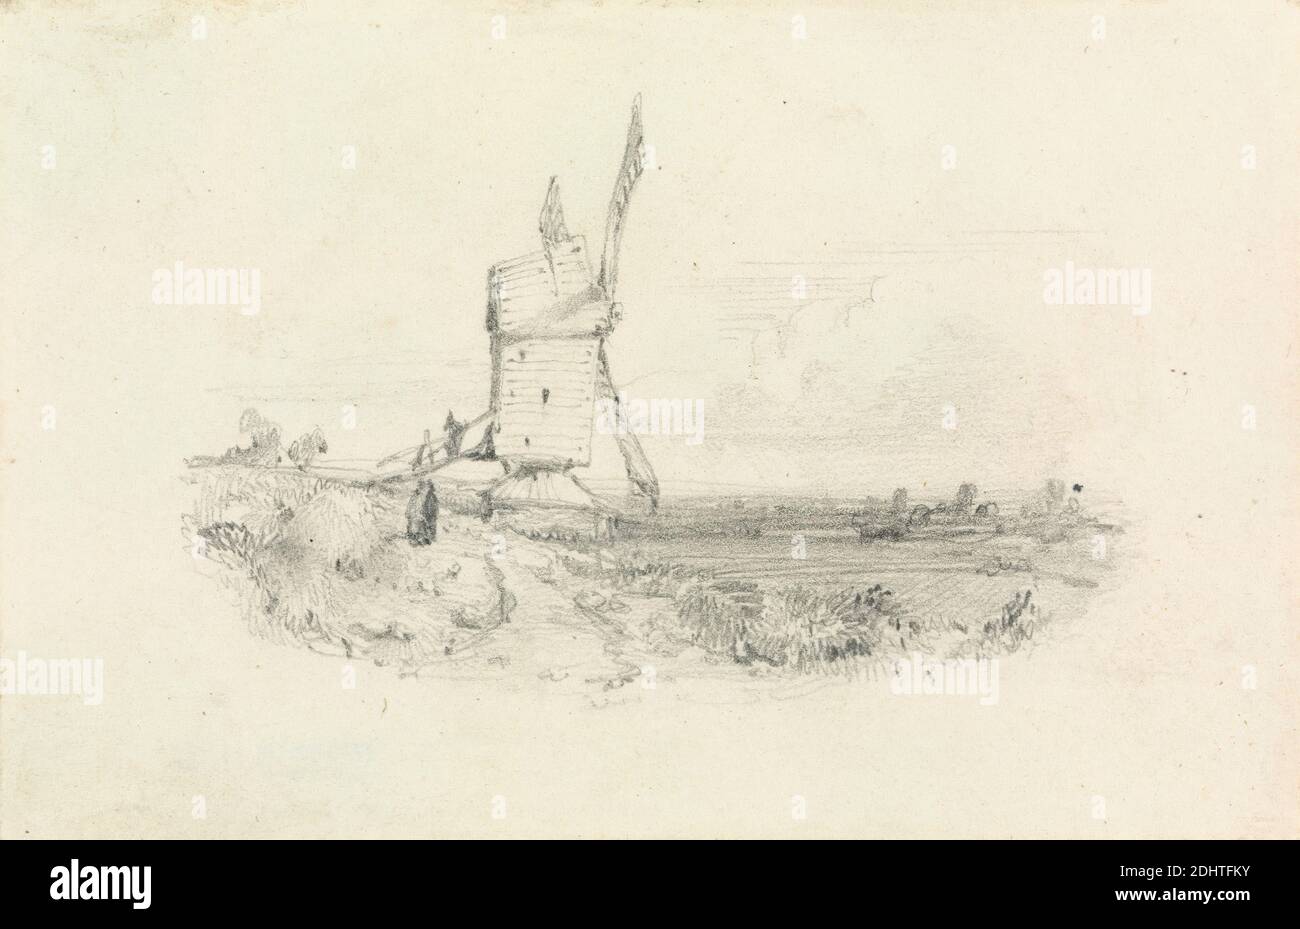 Windmill, William Callow, 1812–1908, British, active in France, undated, Graphite on medium, slightly textured, blued white, wove paper, Sheet: 3 3/8 × 5 inches (8.6 × 12.7 cm), architectural subject, fields, landscape, study (visual work), windmill Stock Photo